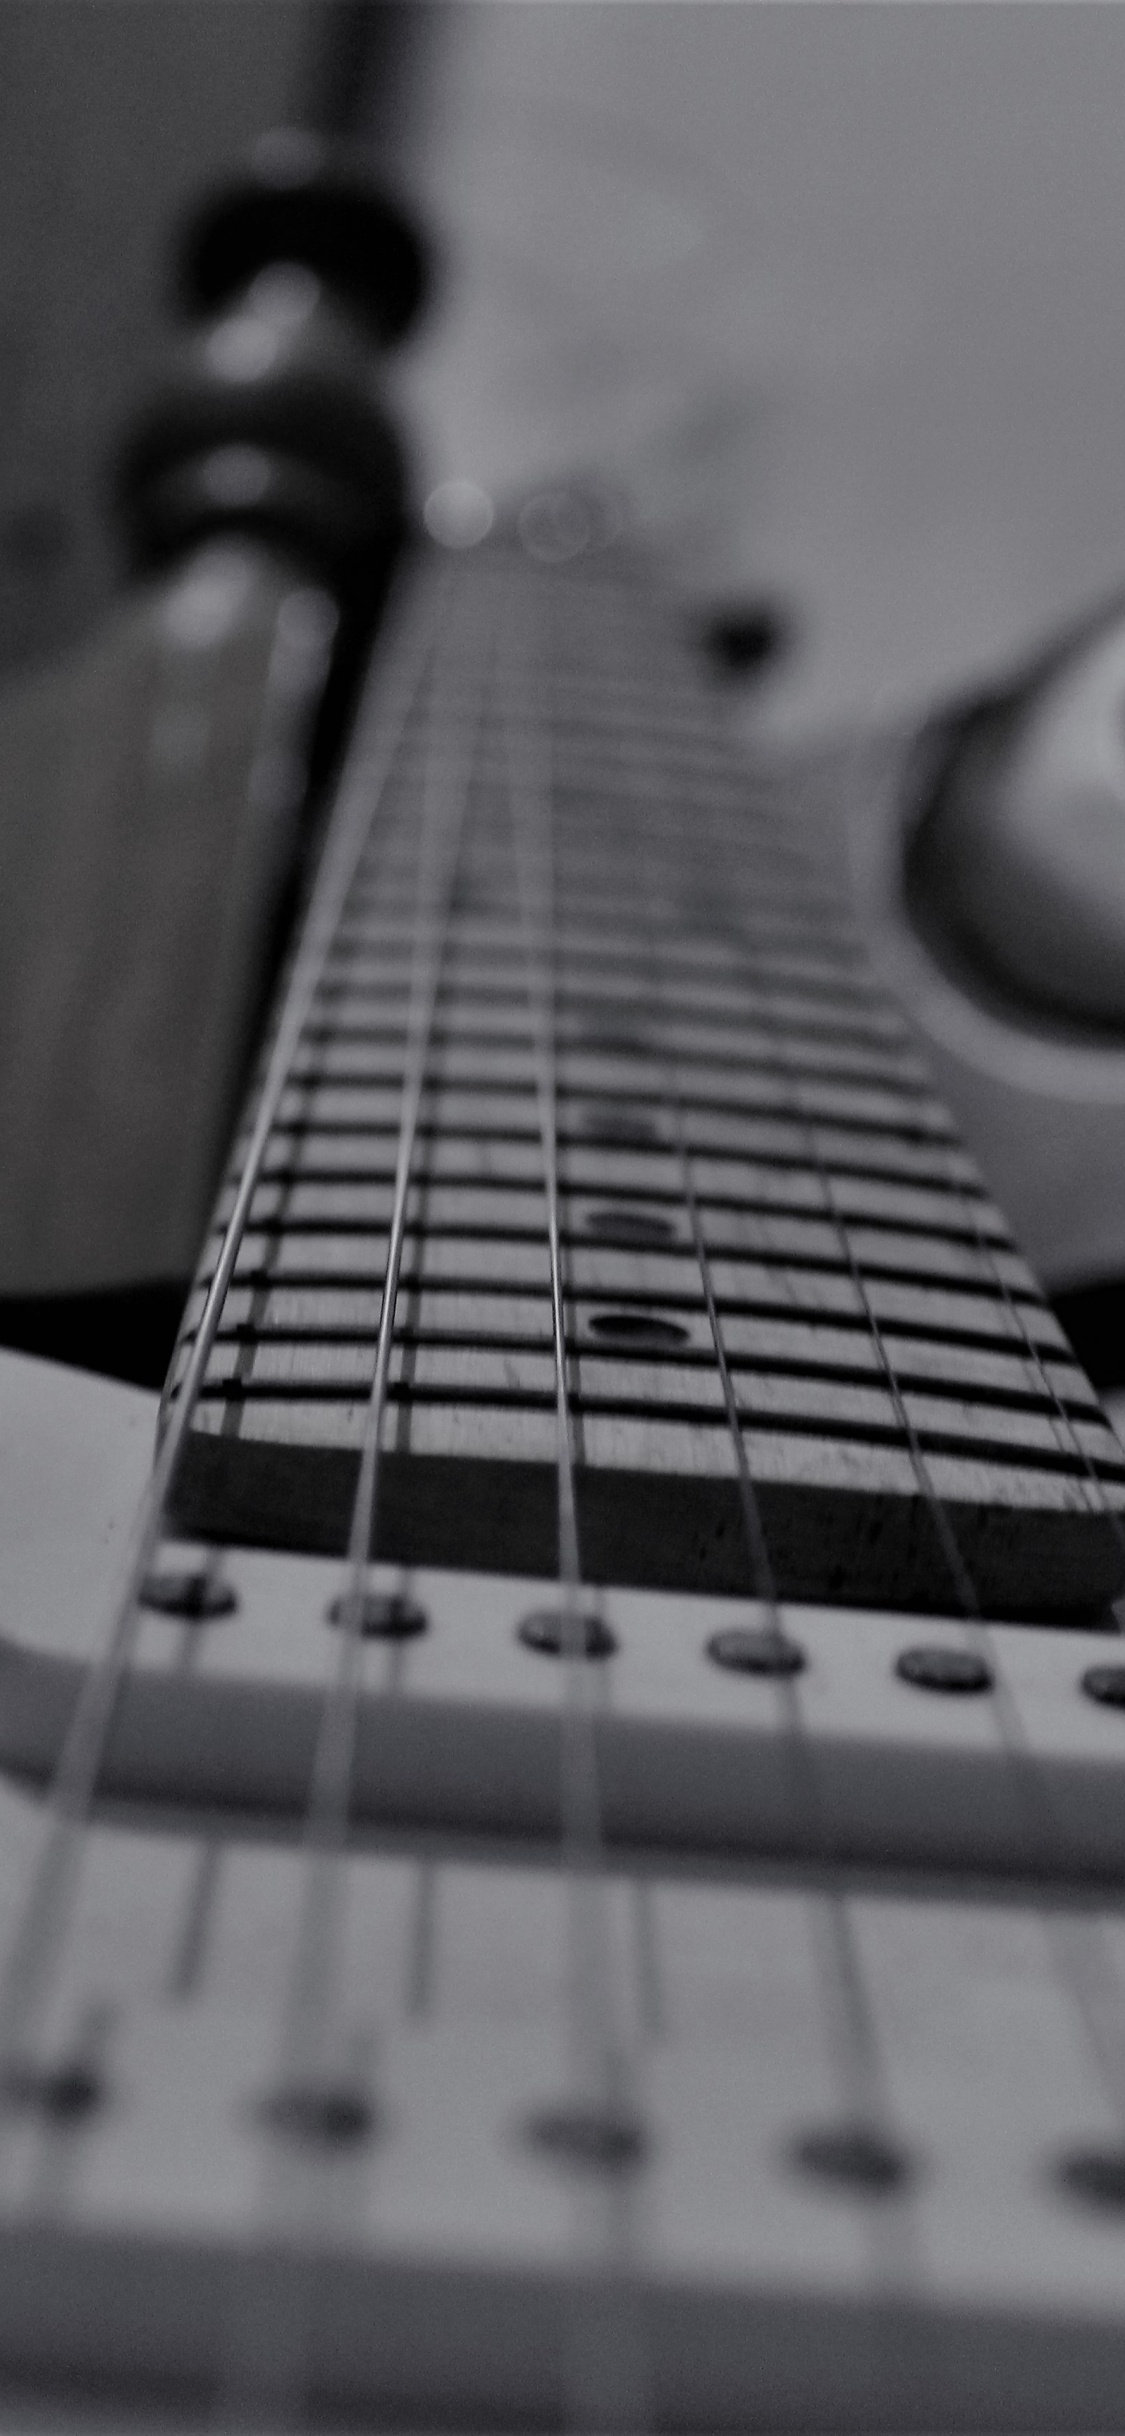 Bass Guitar, Black and White, Electric Guitar, Guitar, String Instrument. Wallpaper in 1125x2436 Resolution